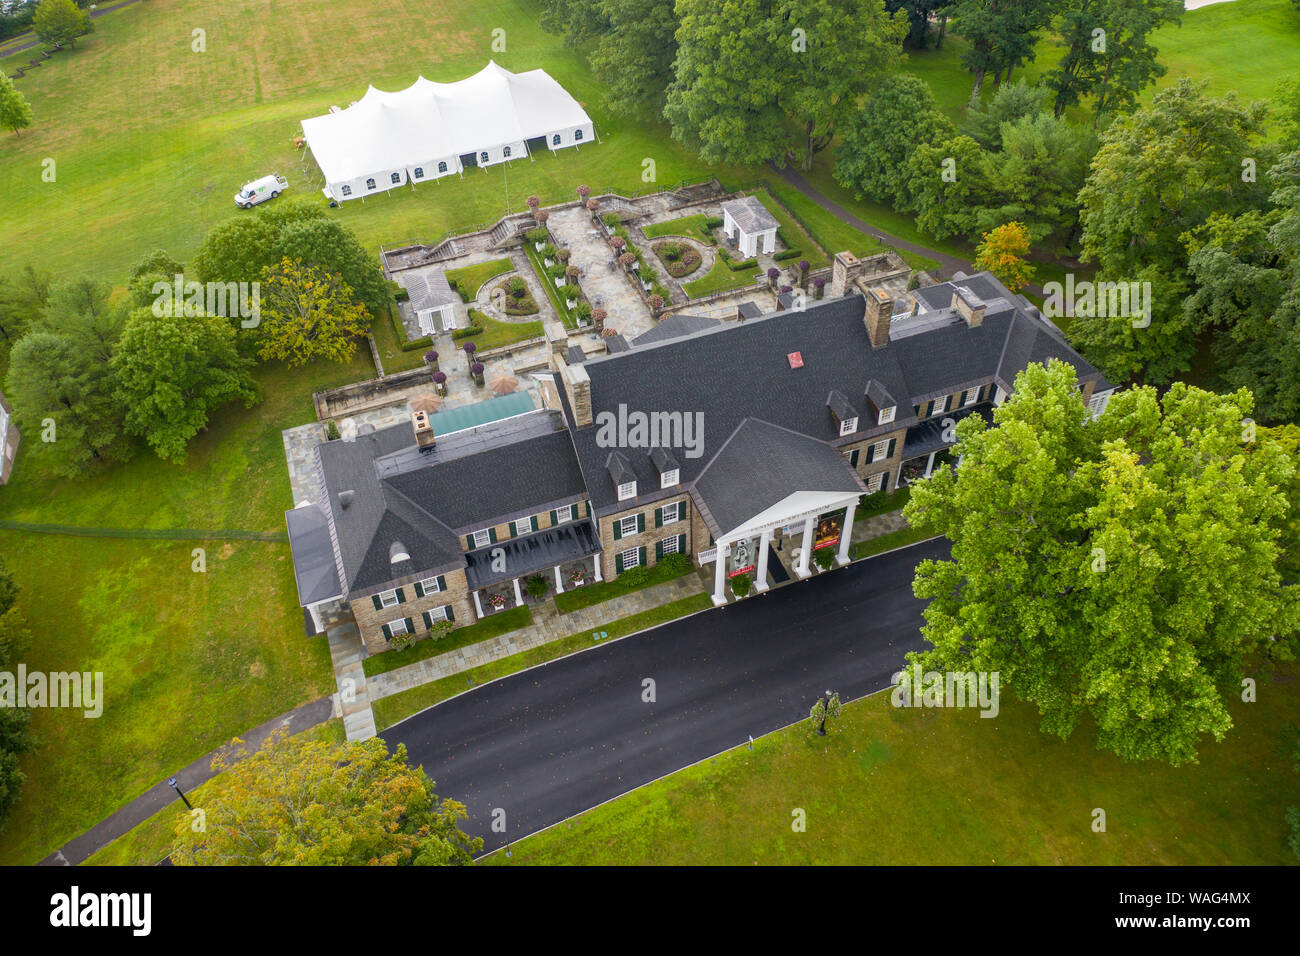 Fenimore Art Museum, Cooperstown, NY, USA Stockfoto